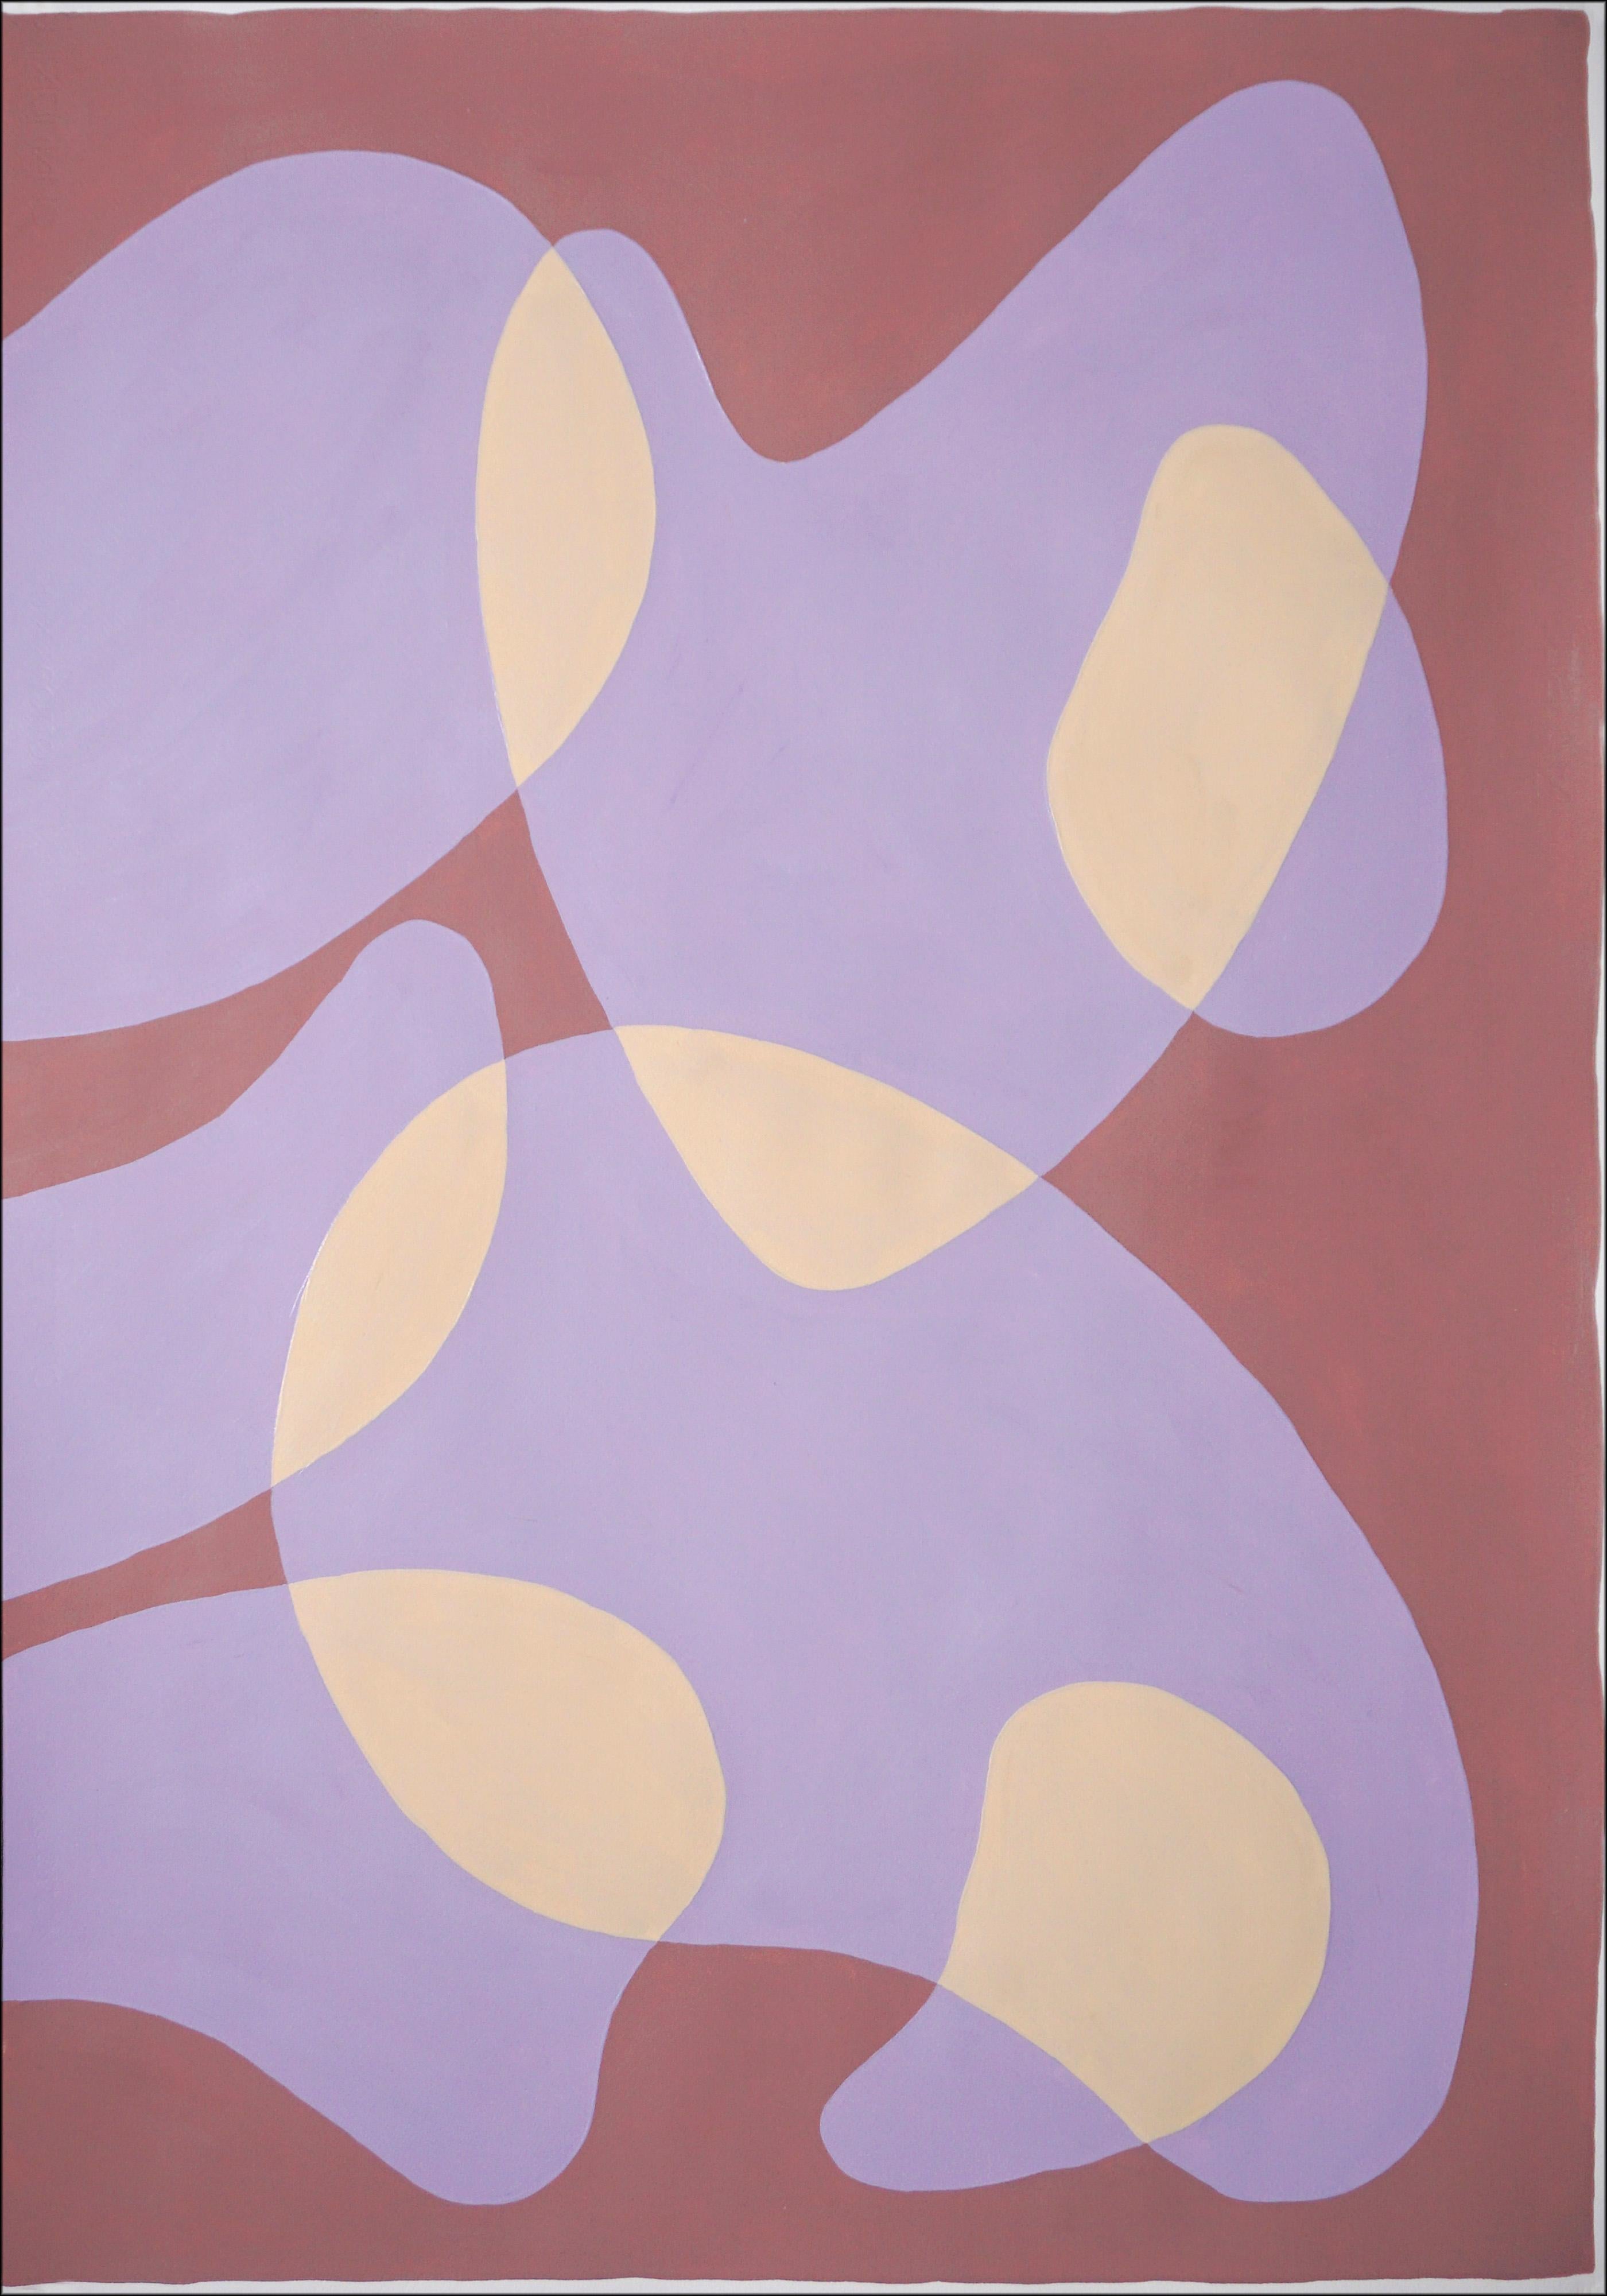 Floating Shapes in Mauve, Mid-Century Modern Abstract Diptych, Coral and Beige  1